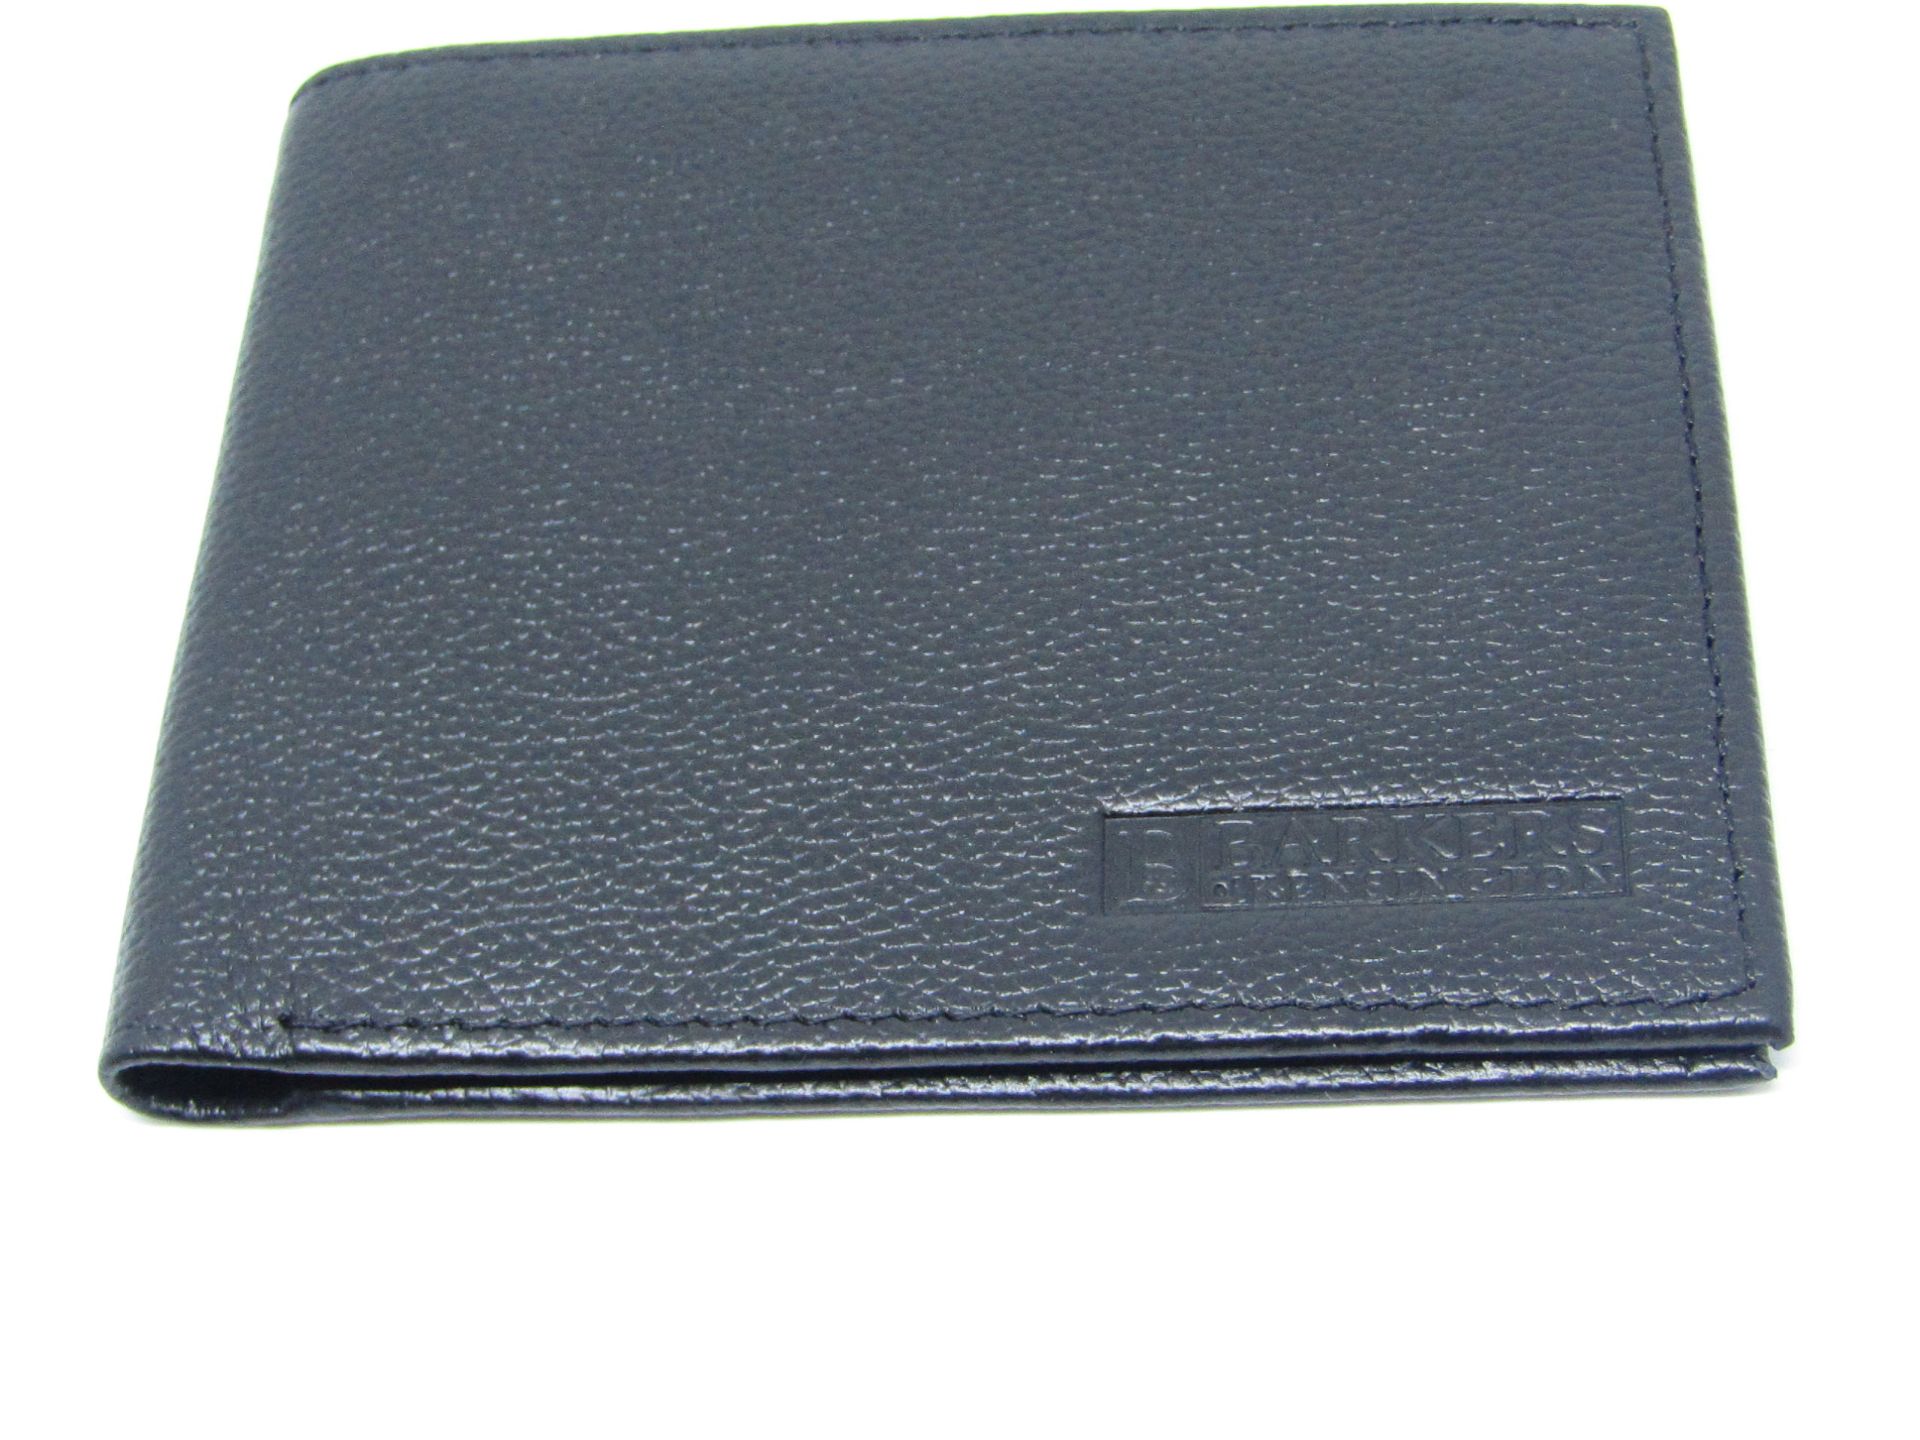 Barkers of Kensington Black Leather wallet new & packaged